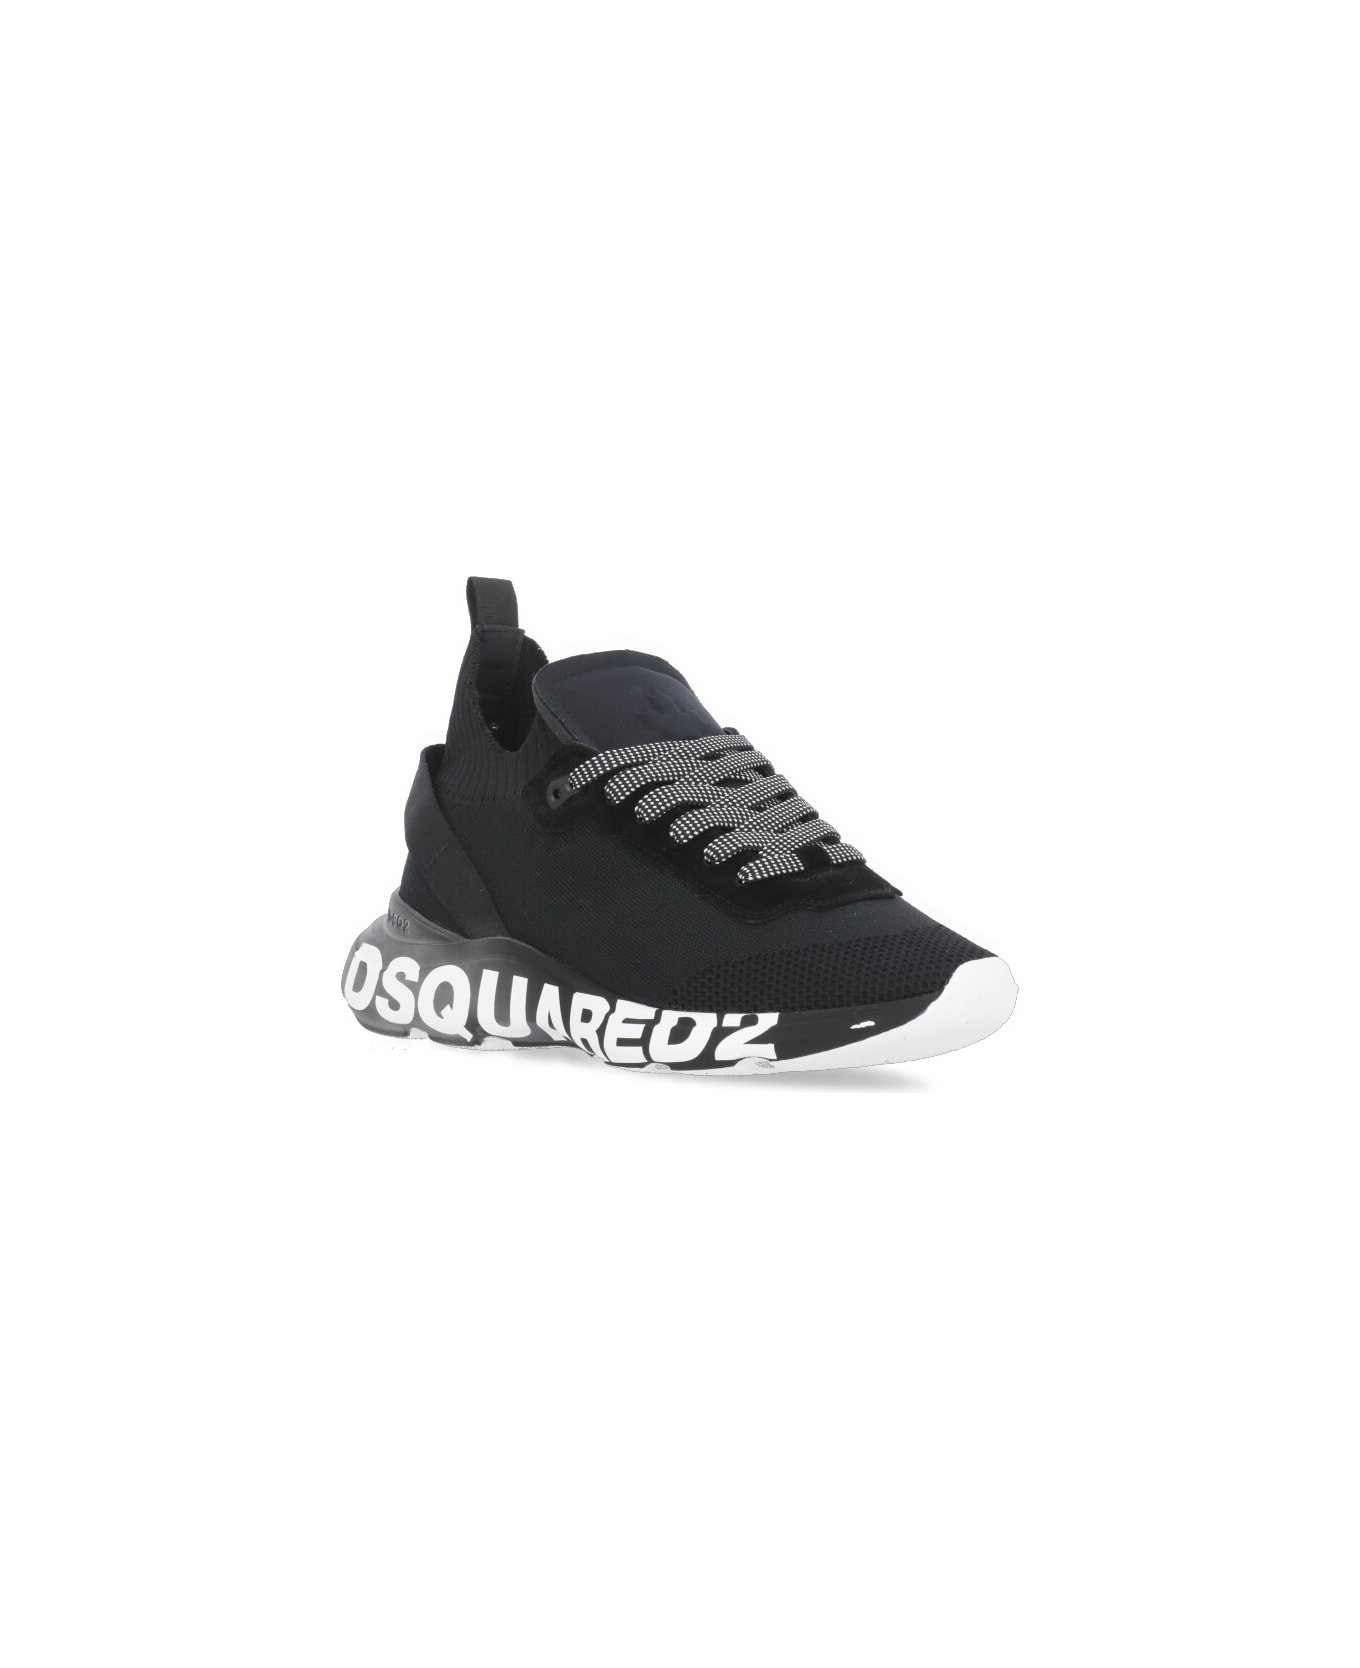 Dsquared2 Fly Sneakers - Black